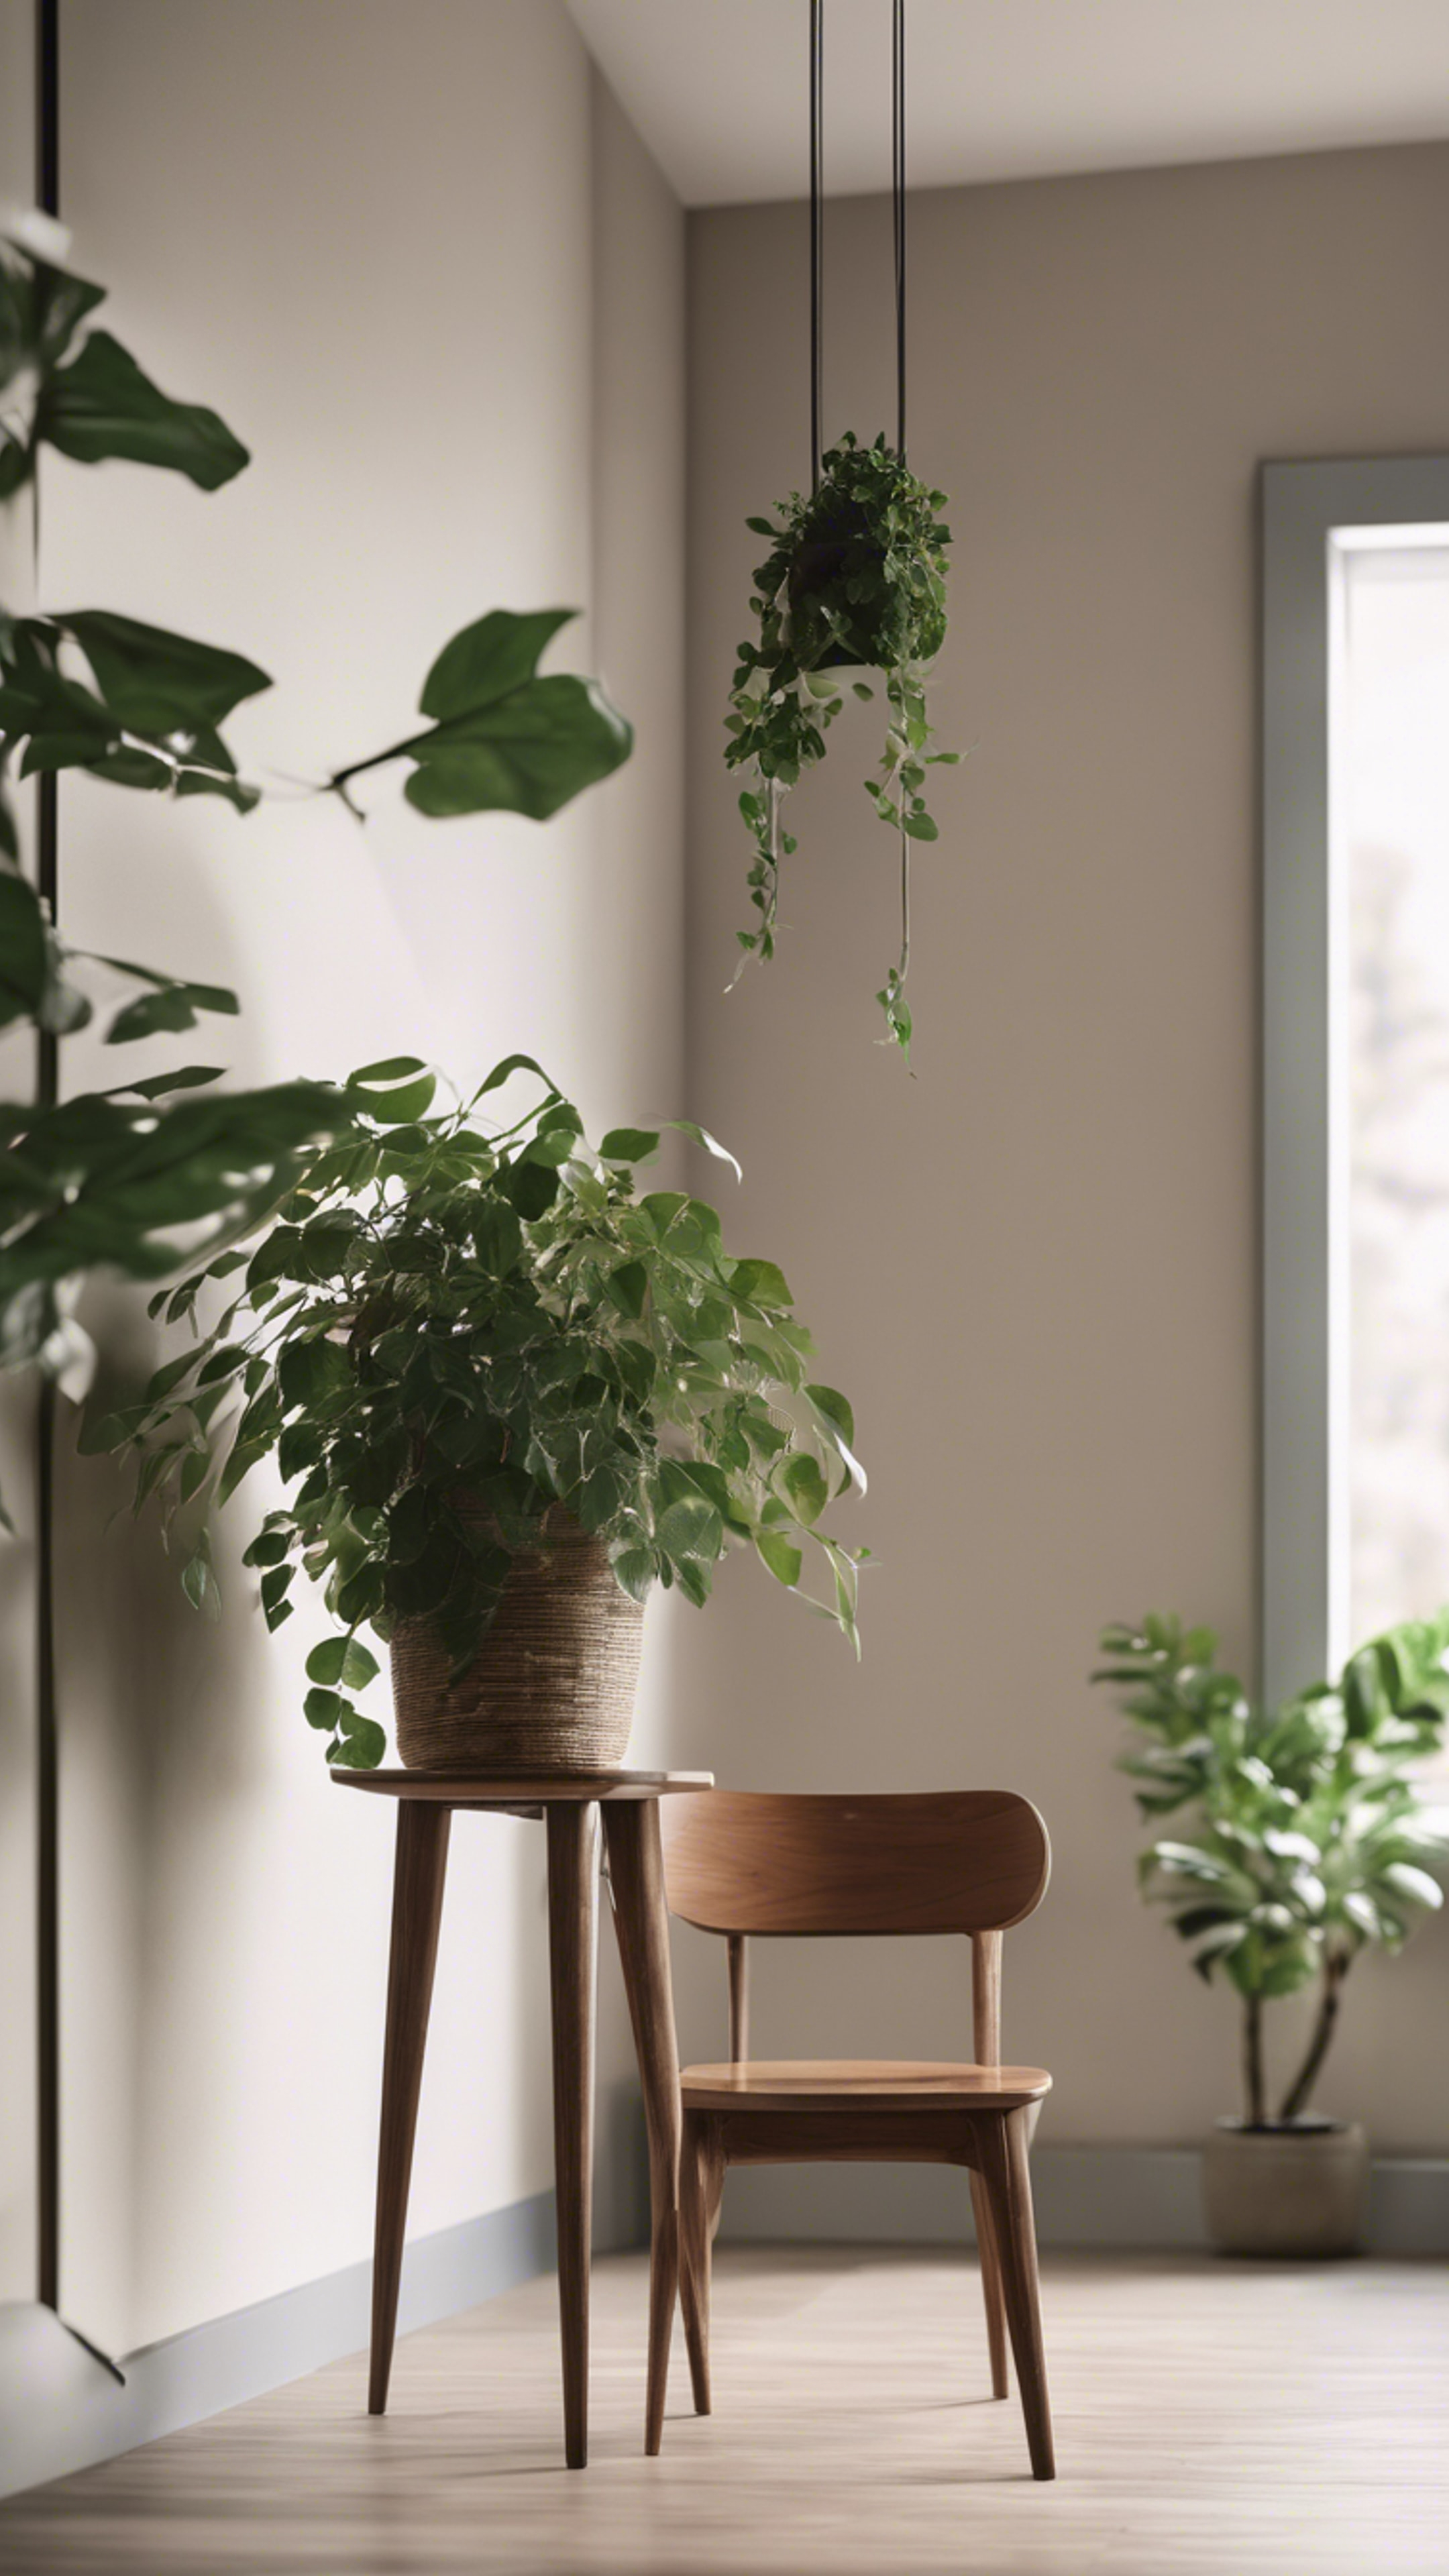 The corner of a minimalist room, featuring a hanging plant and a low, wooden side table. Ταπετσαρία[20a0de2ec9c541069b04]